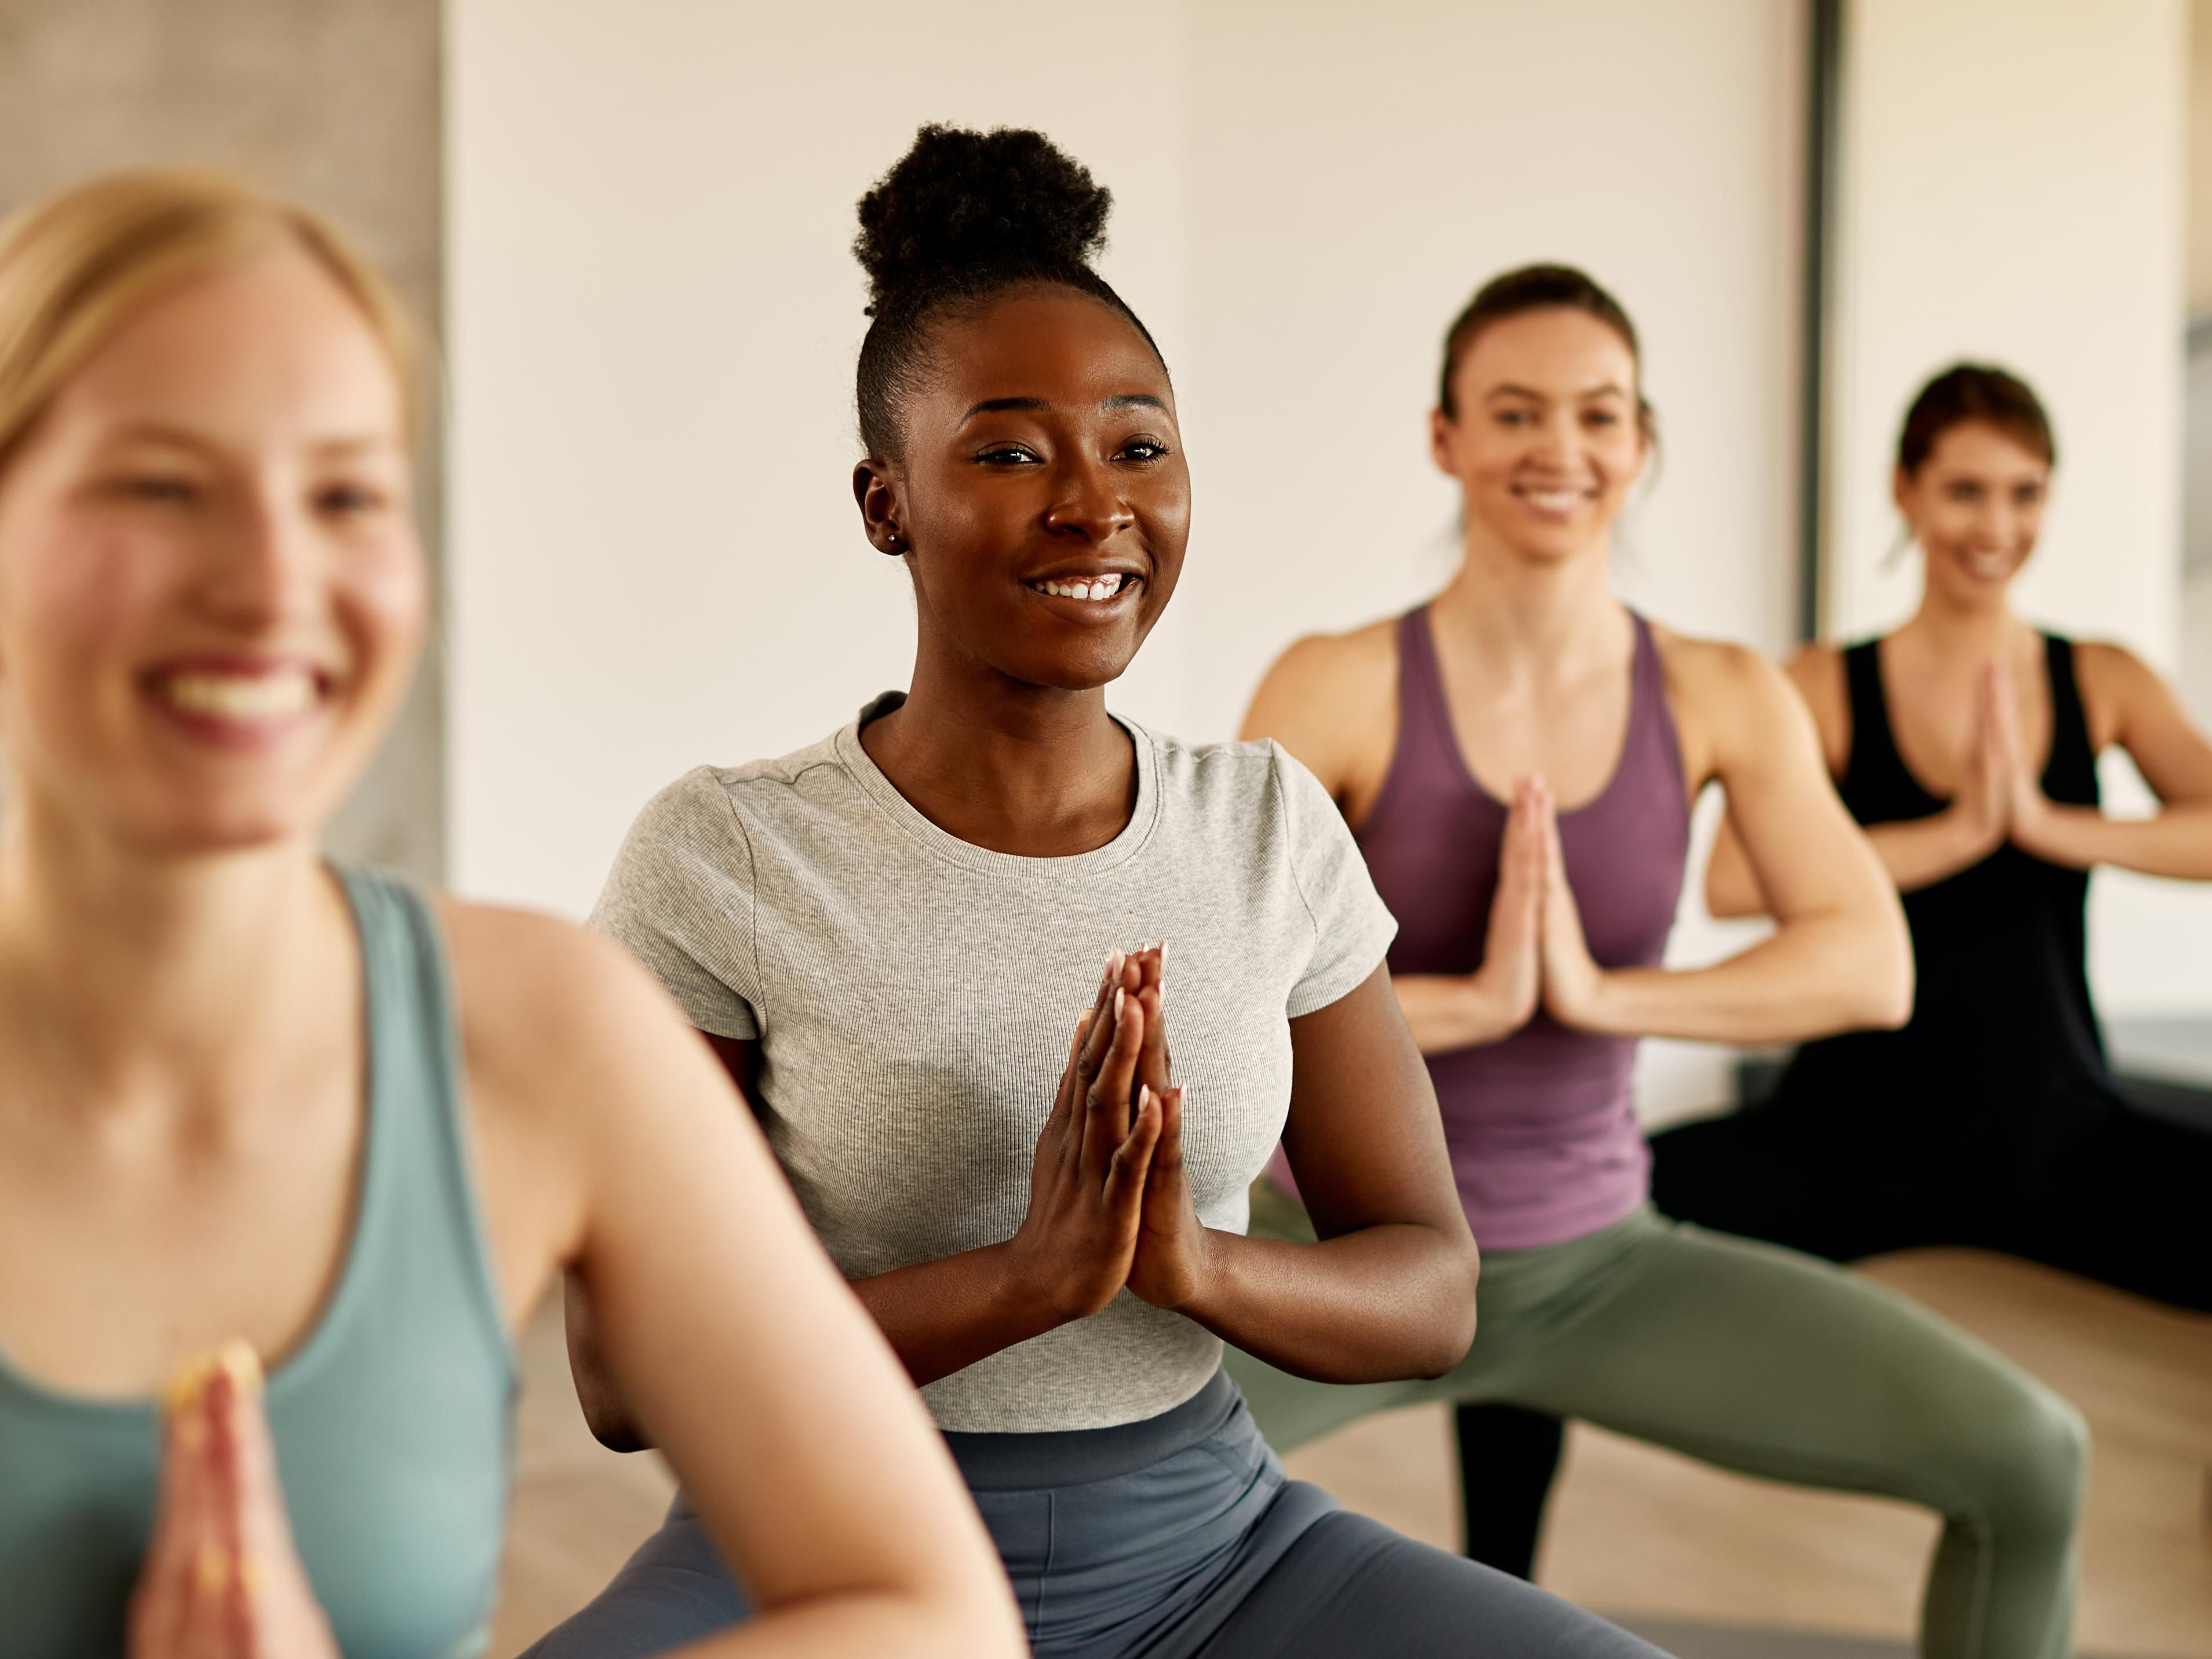 Keep moving your way with our on-property yoga classes! Join us in our flex room every Wednesday from 7am-7:45am for a Rise & Shine Yoga class, led by Datza Studios, a local yoga studio here in Seattle. 